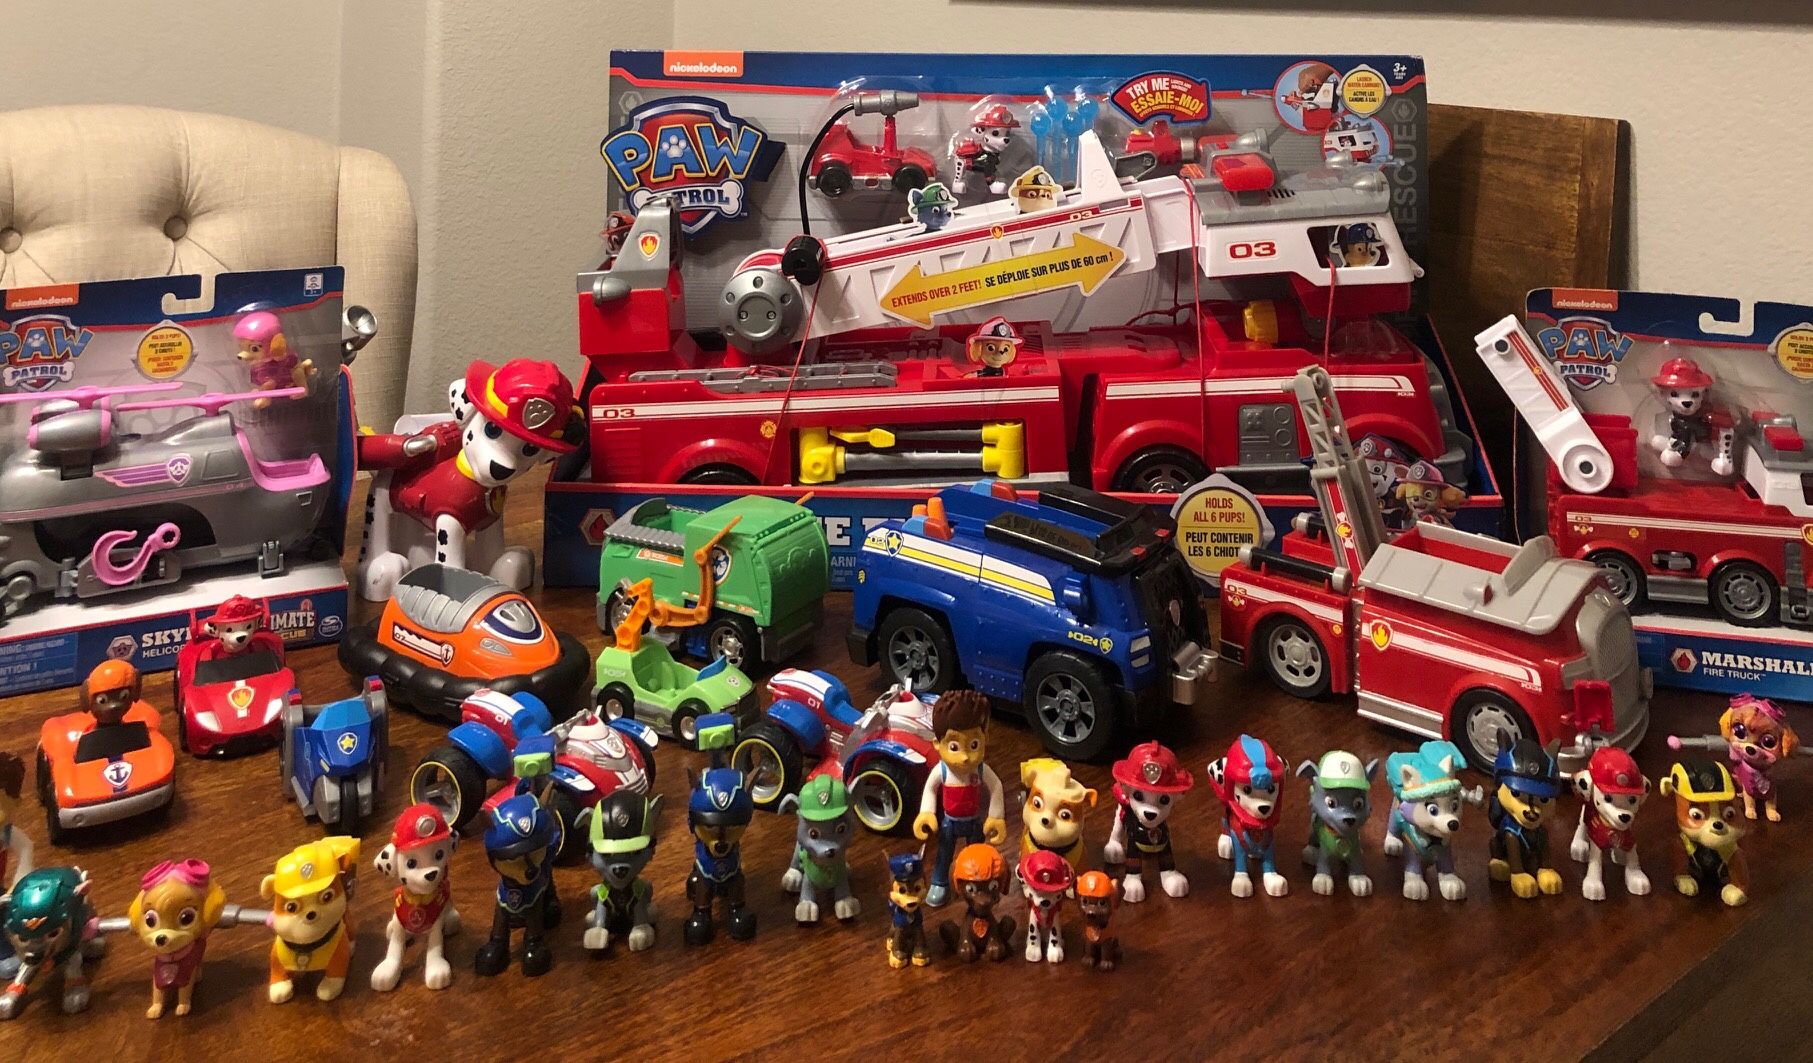 Paw Patrol Paw Patrol !! Mega collection new and use toy lot . Fire truck rocky skye jake chase Marshall Zuma Ryder Alex rubble dogs toys